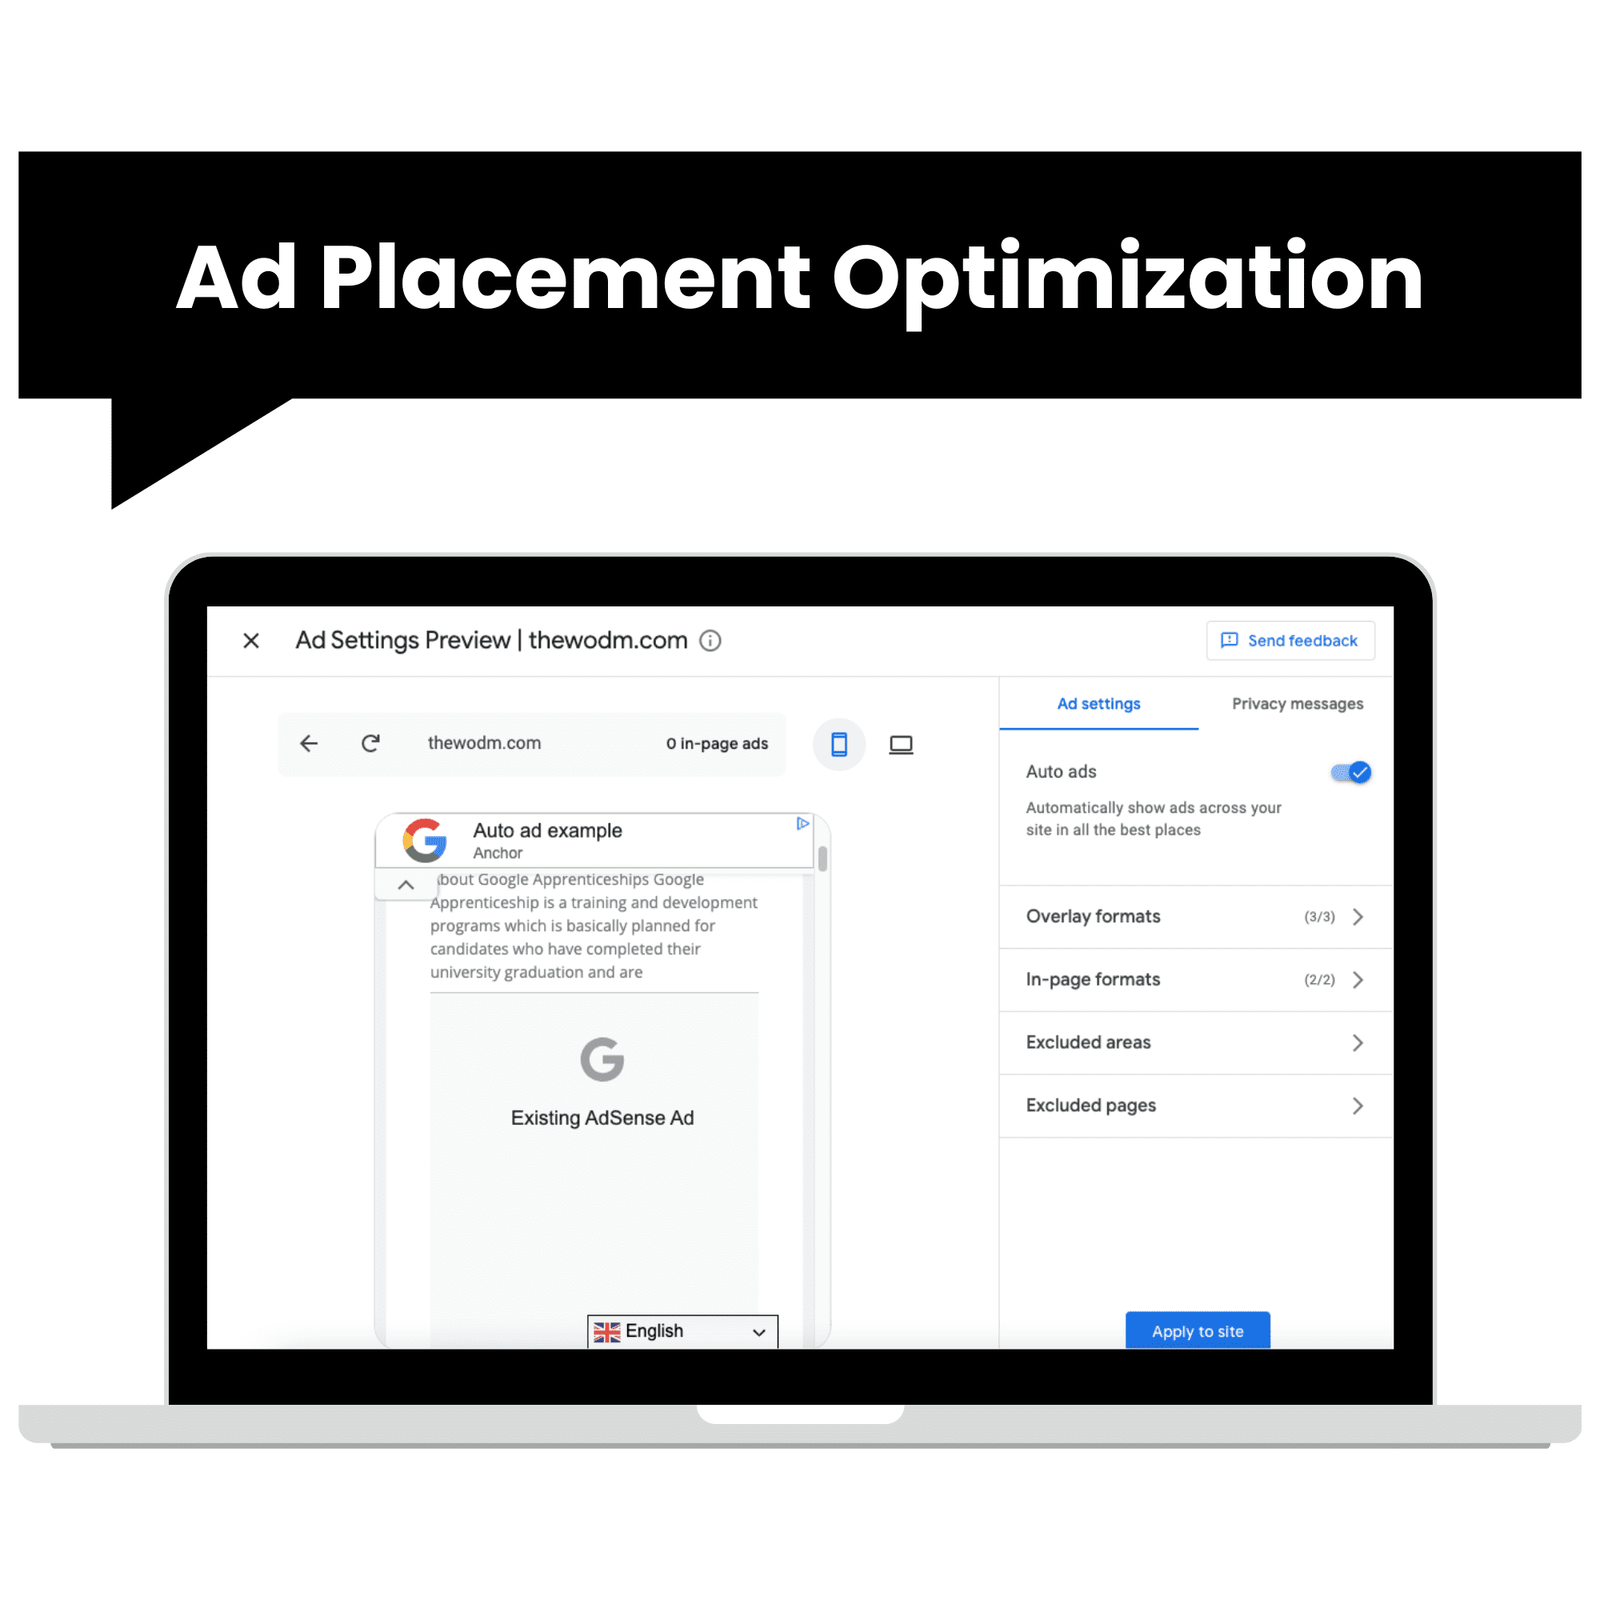 Ad Placement Optimization